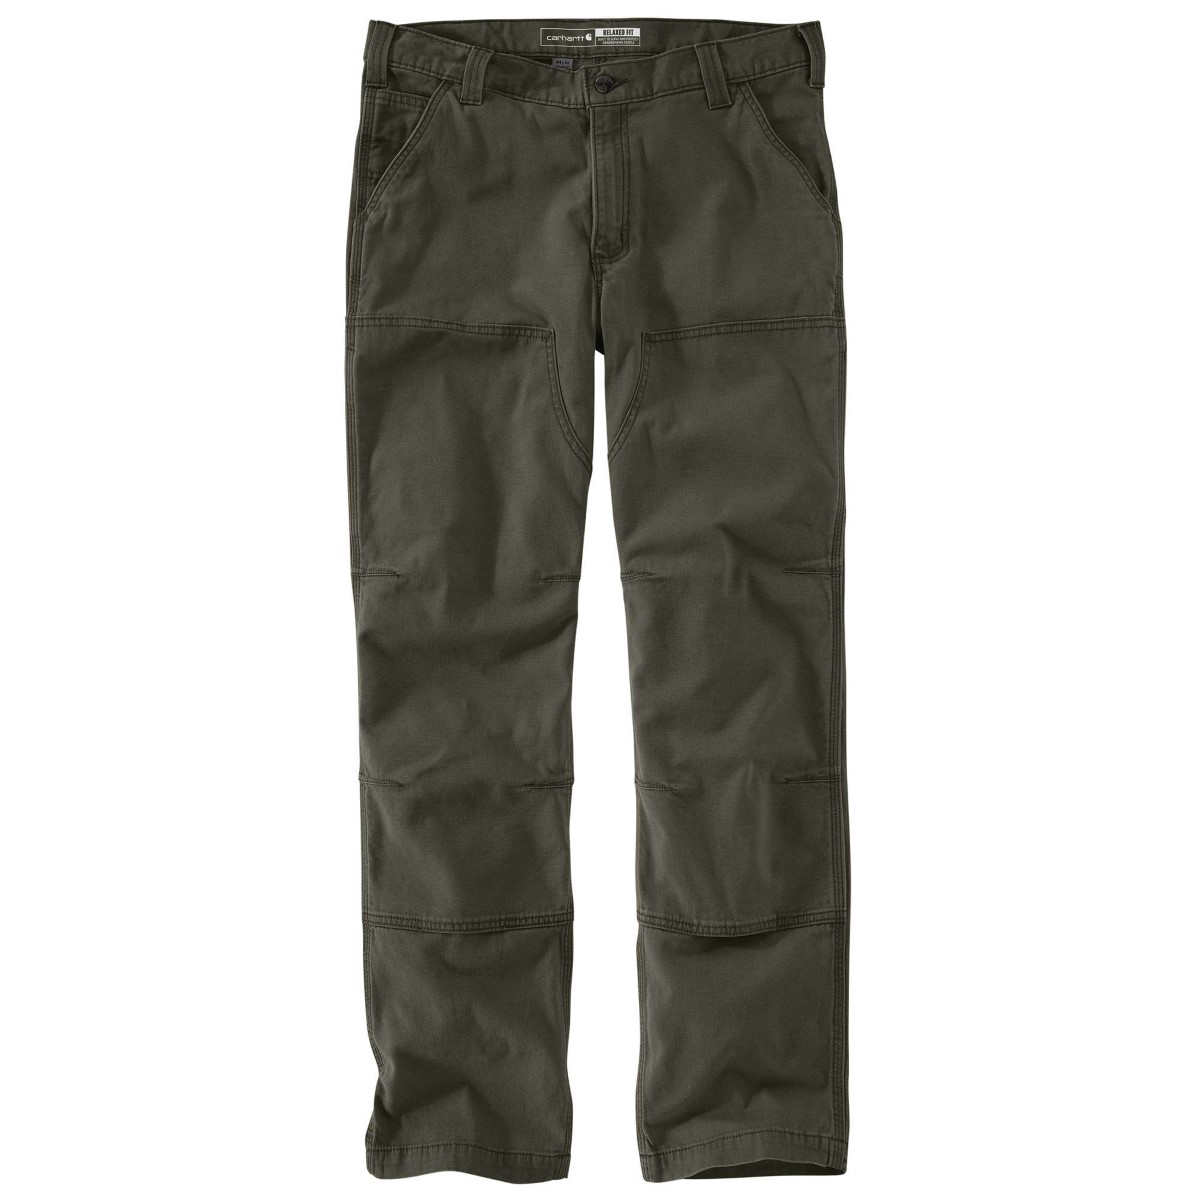 CARHARTT Men's Rugged Flex Relaxed Fit Duck Dungaree Work Pants - Eastern  Mountain Sports